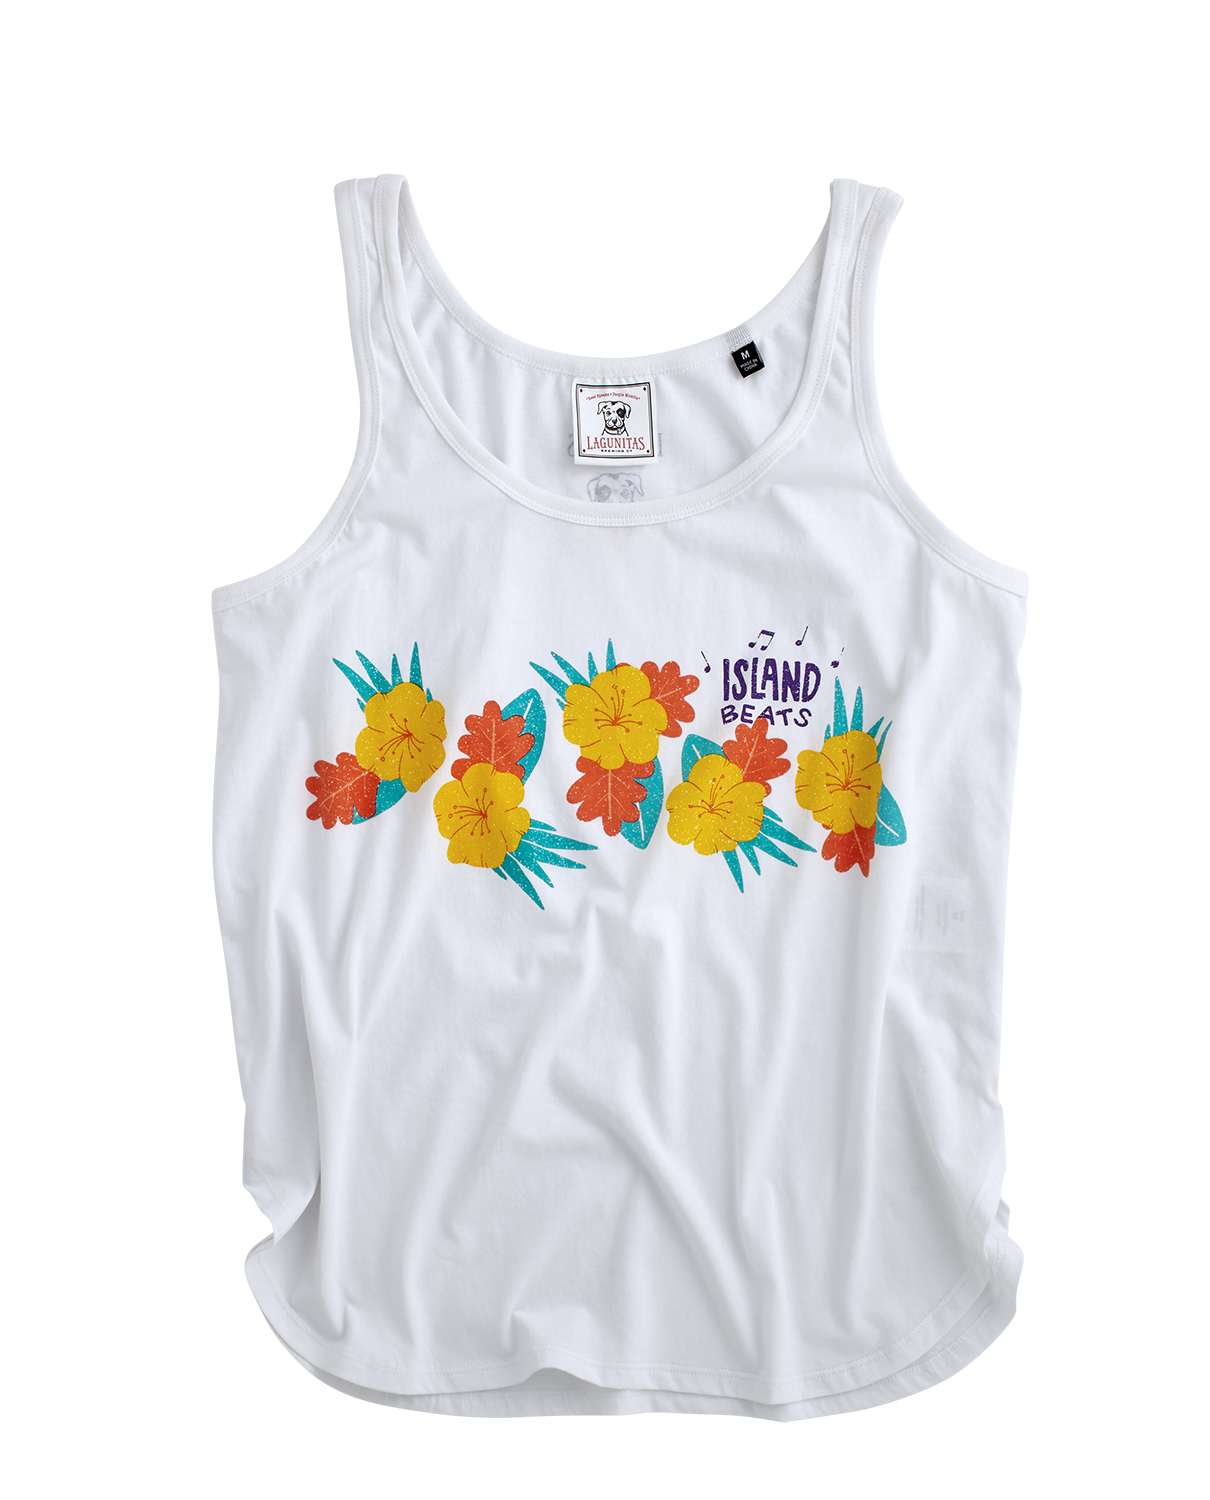 “A vibrant and tropical tank top featuring a premium quality design. This Lagunitas brewery merchandise is perfect for warm weather, with its comfortable and breathable fabric. The tank top showcases an island-inspired fashion, with eye-catching and colorful visuals. It proudly displays Lagunitas branding, representing the authentic brewery style. Lightweight and sleeveless, this versatile tank top allows you to celebrate the Lagunitas spirit with style.”